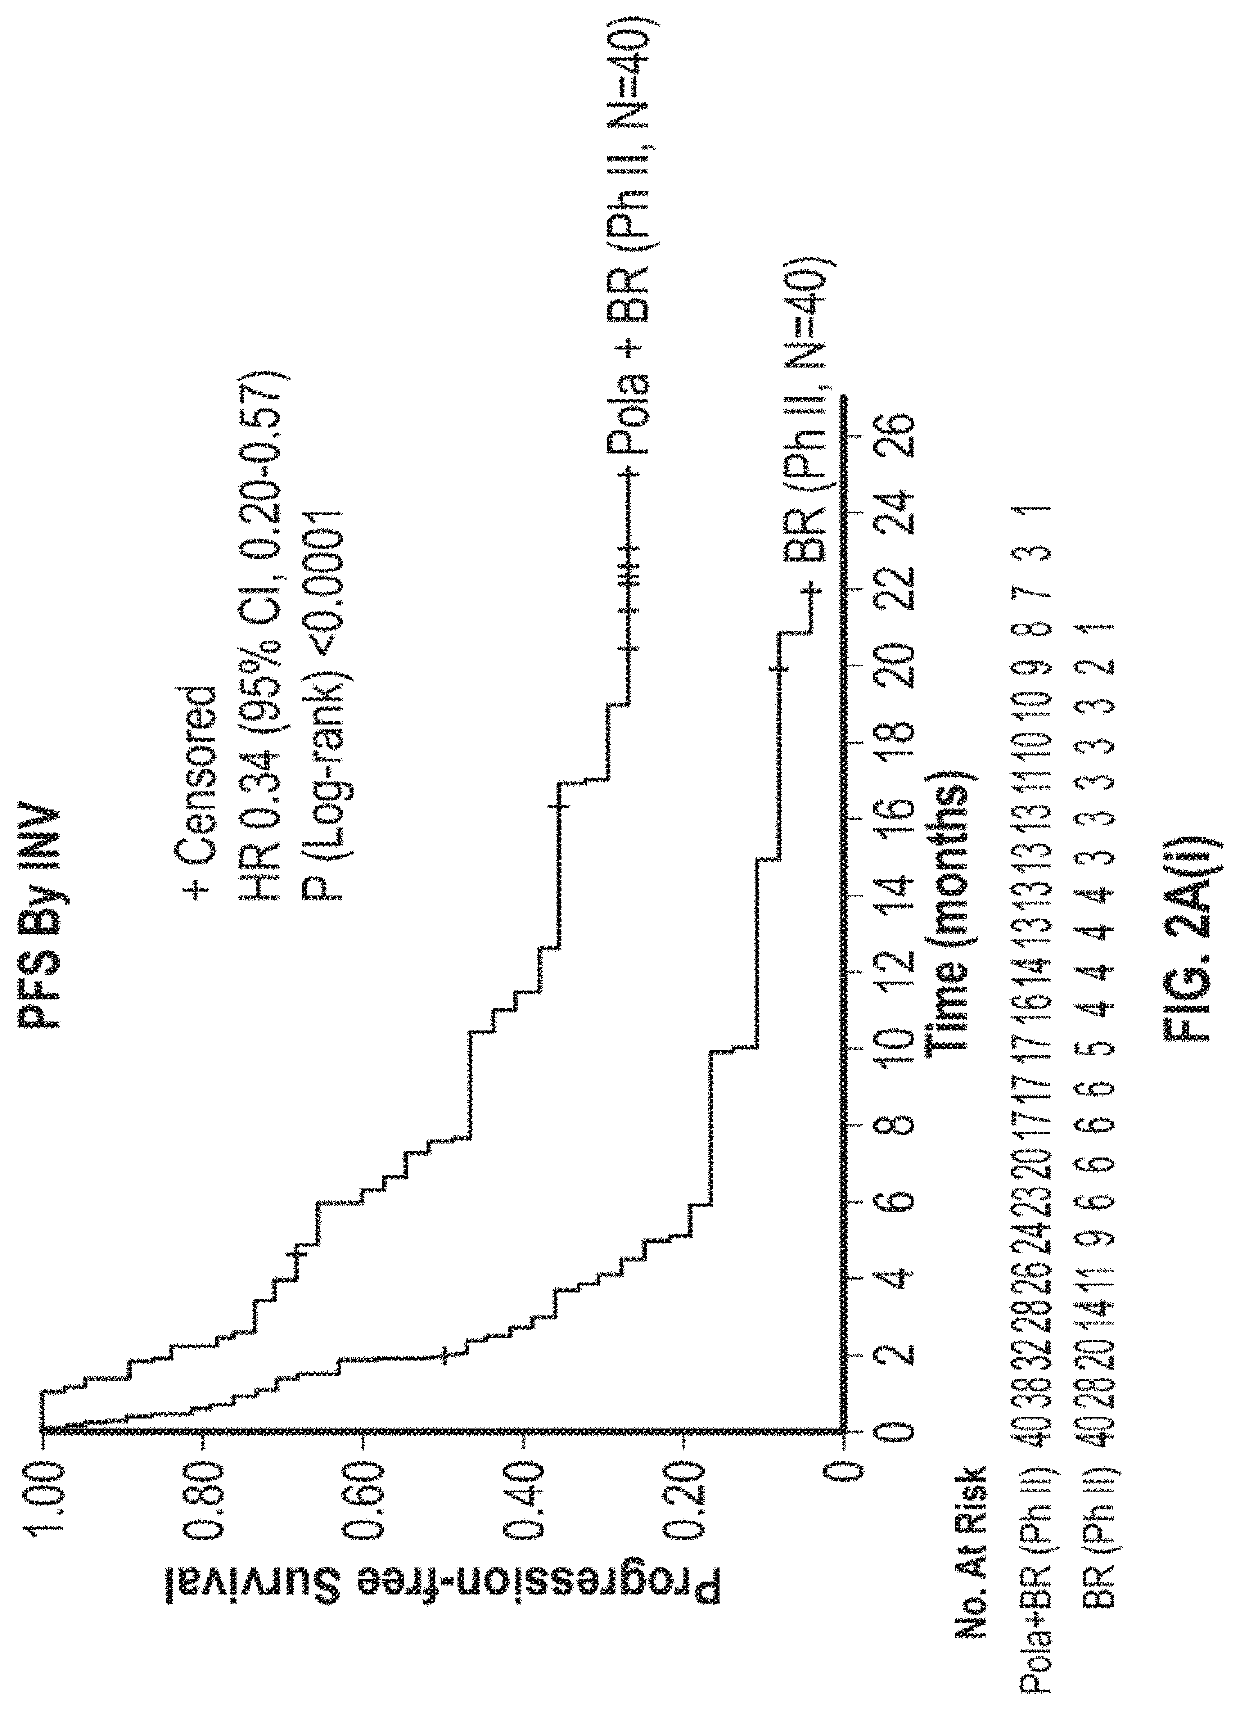 Combination therapy of diffuse large b-cell lymphoma comprising an Anti-cd79b immunoconjugates, an alkylating agent and an Anti-cd20 antibody